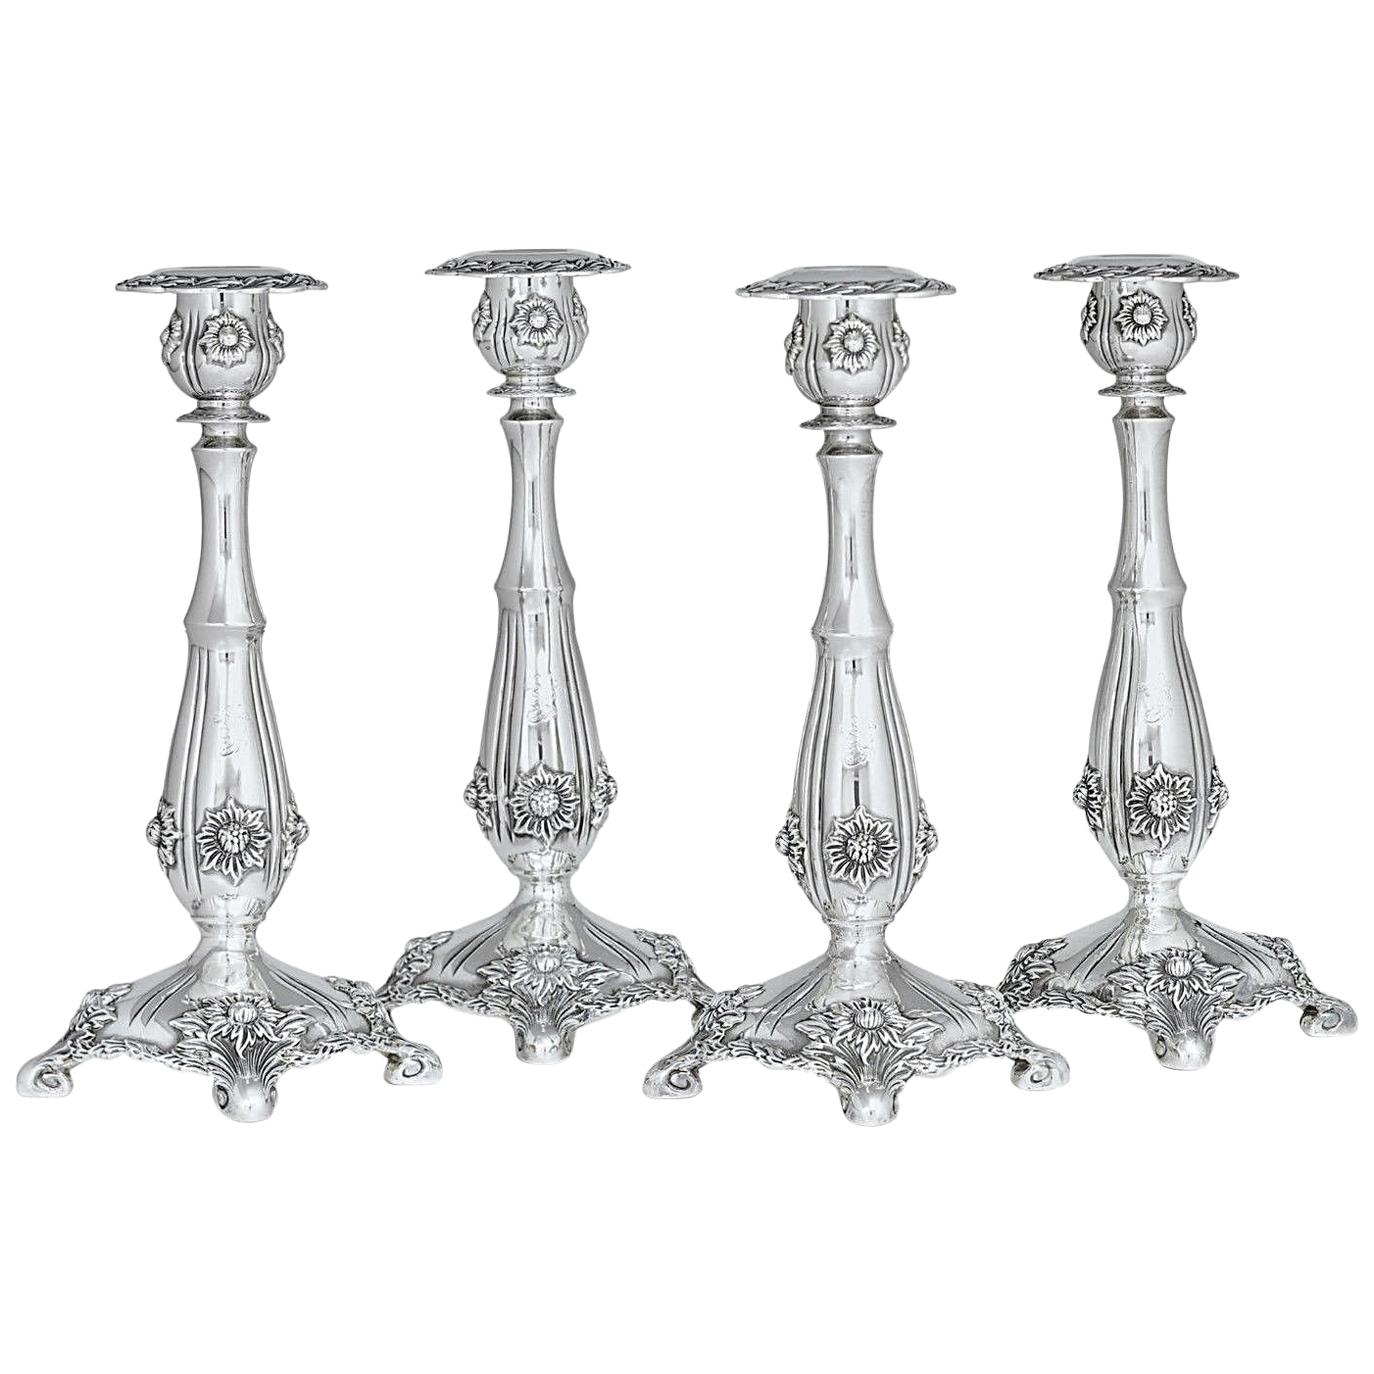 Tiffany & Co Sterling Silver Chrysanthemum Candlesticks, circa 1920 For Sale